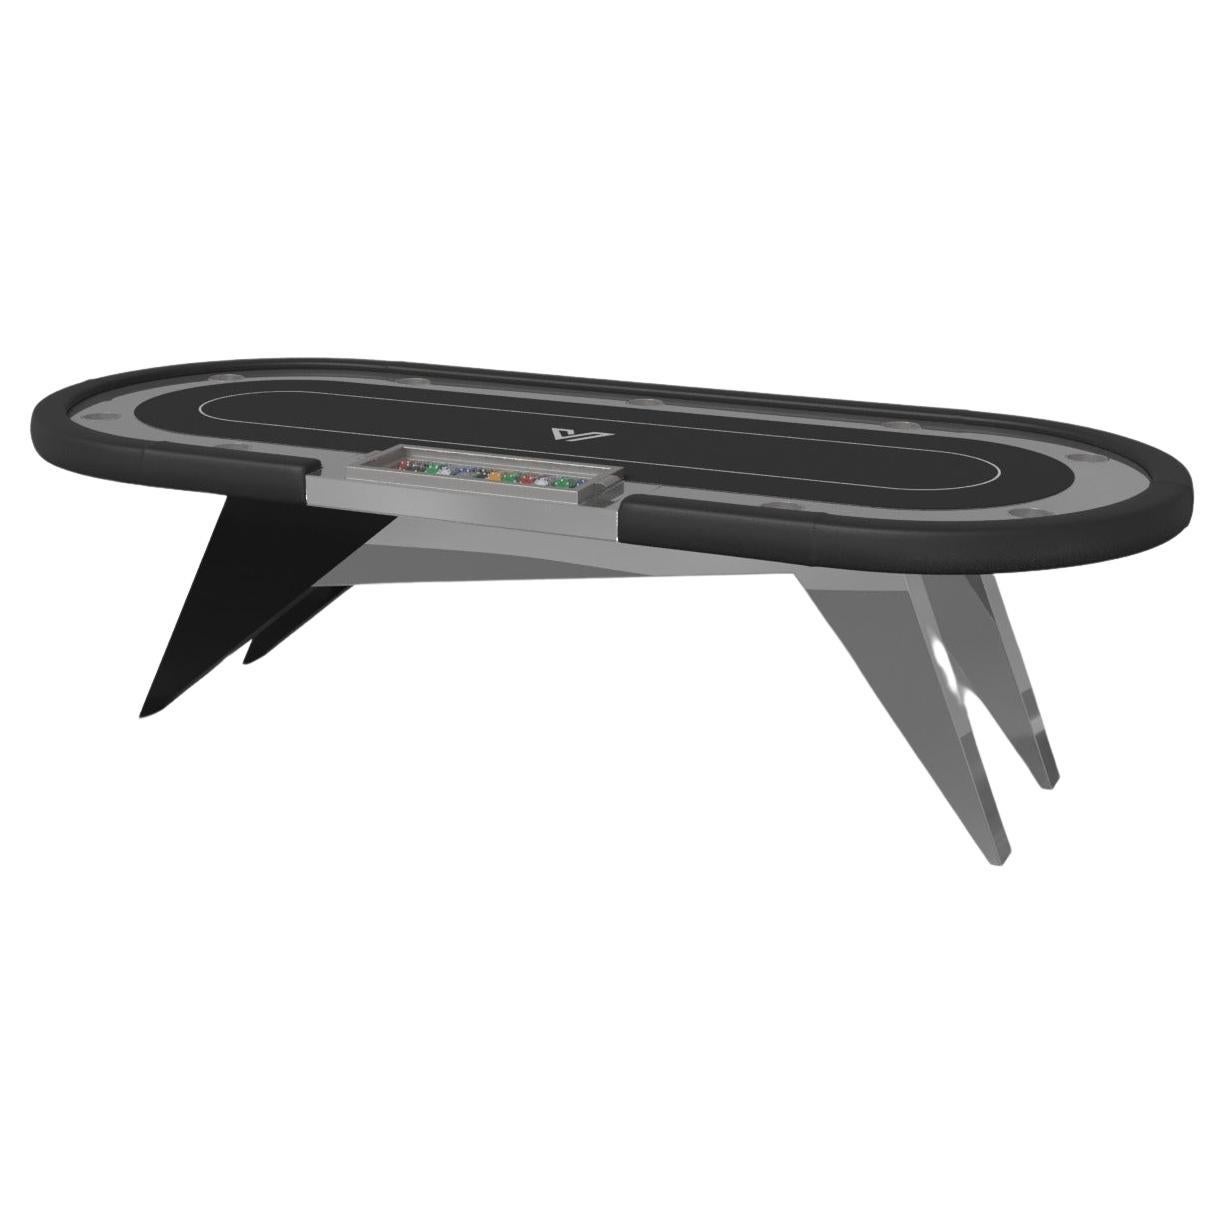 Elevate Customs Mantis Poker Tables / Stainless Steel Sheet Metal in 8'8" - USA For Sale